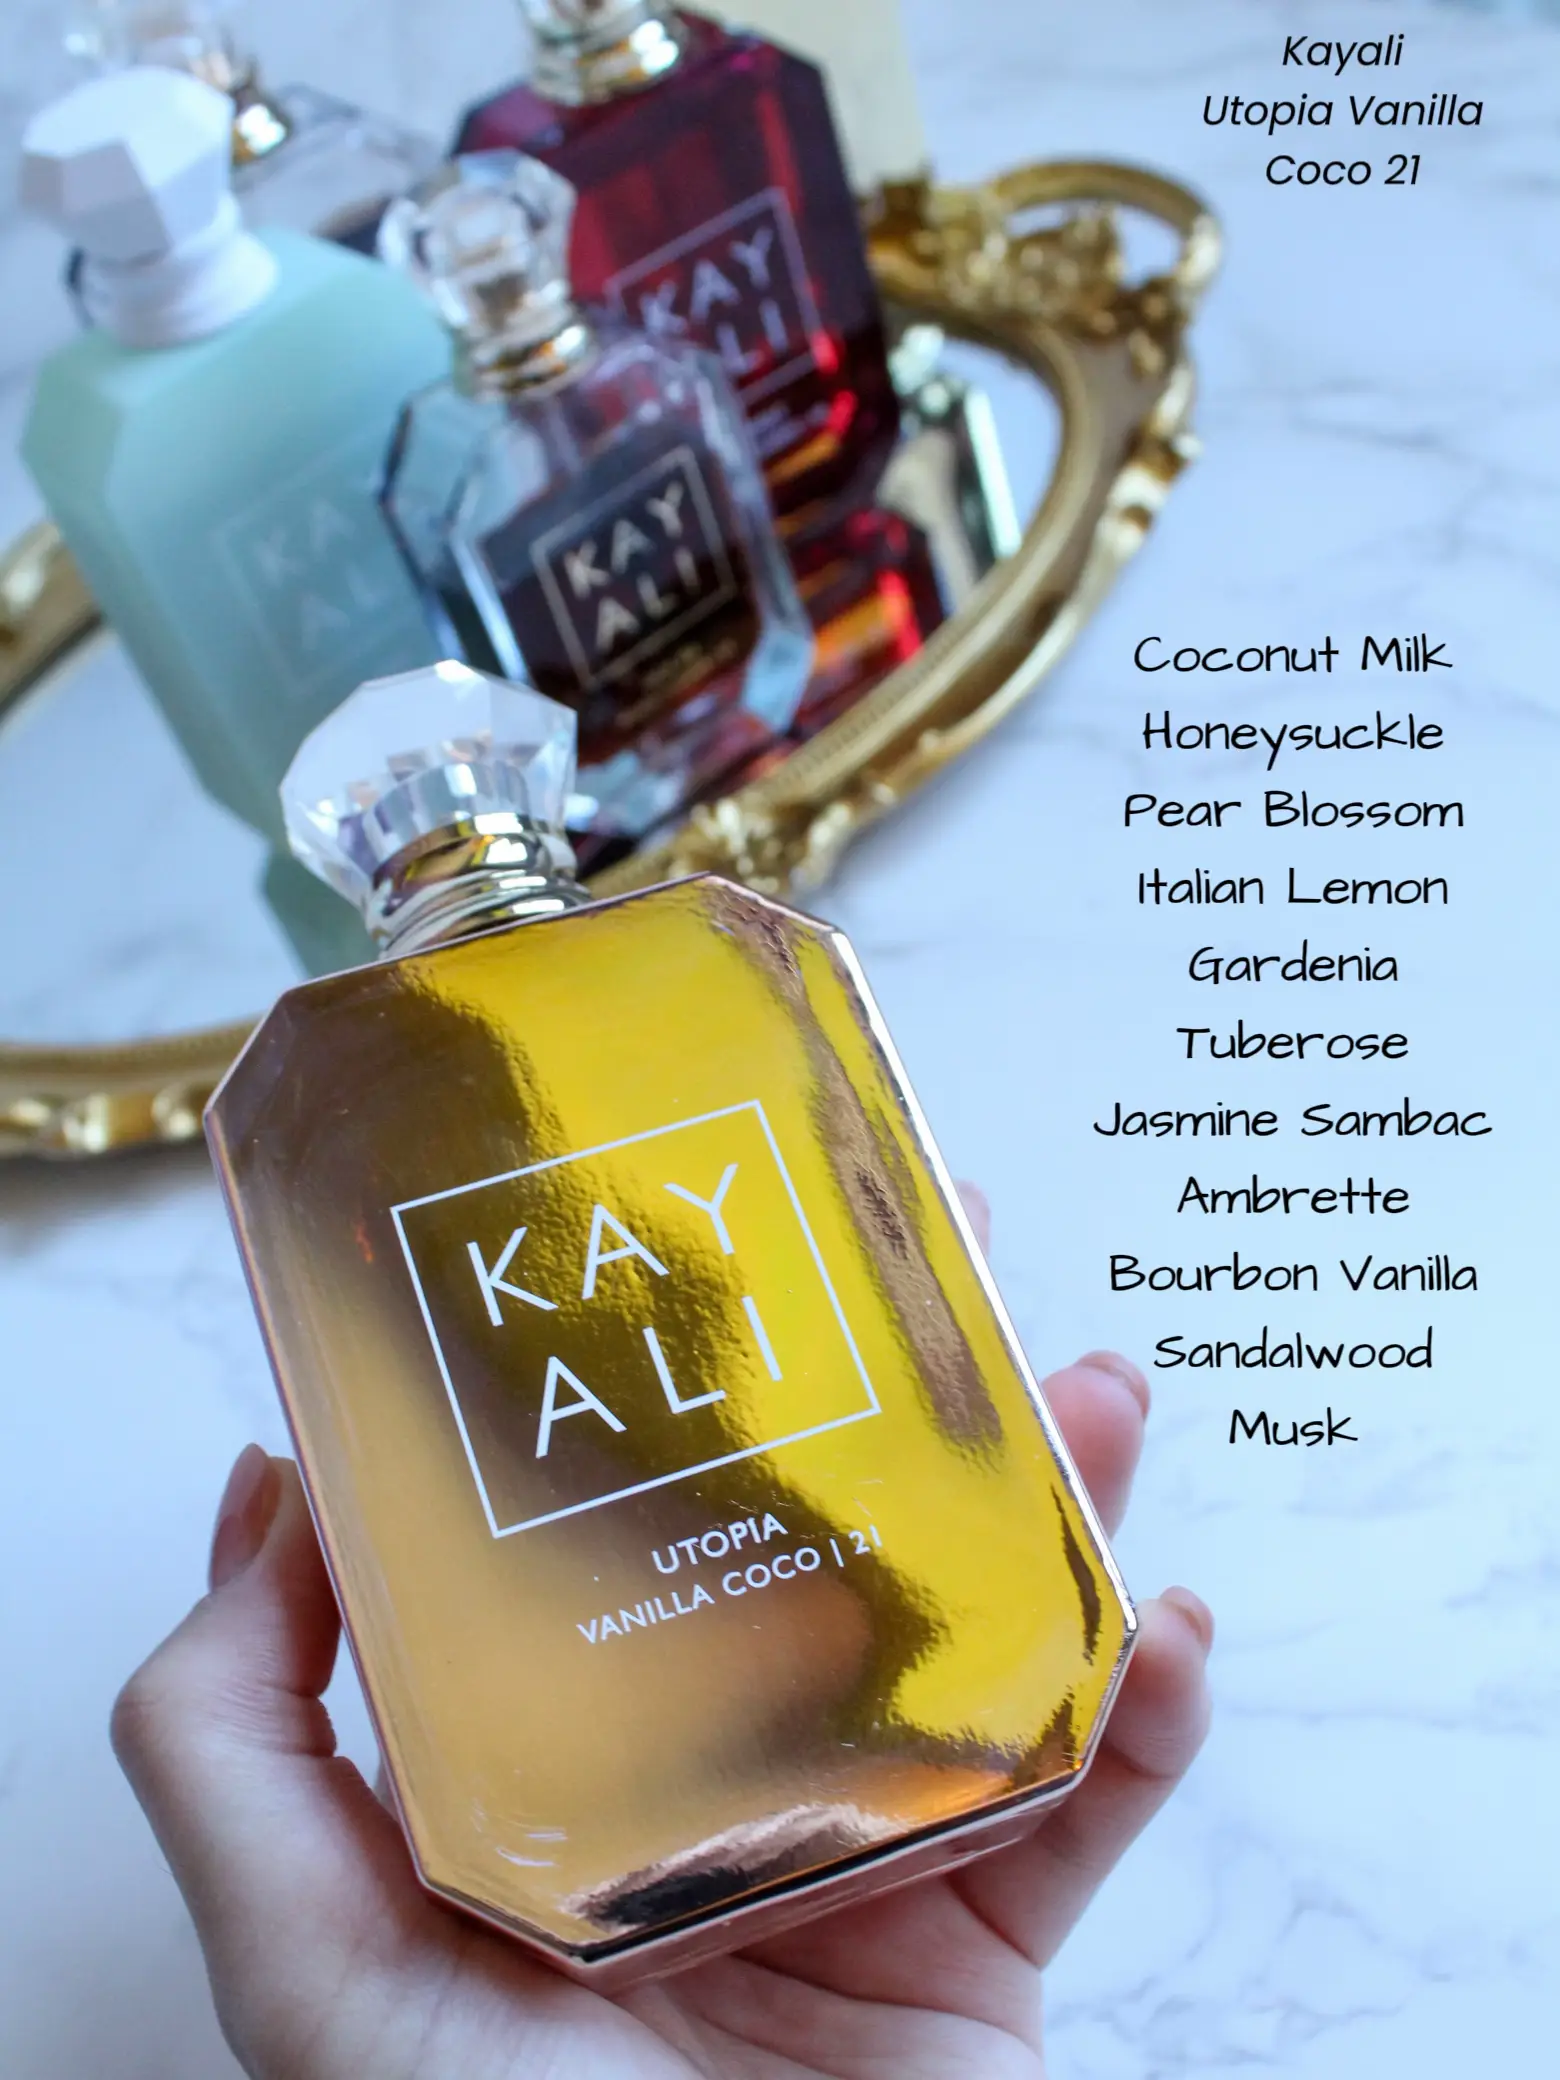 My Kayali Collection 🥰, Gallery posted by Amanda Ashly